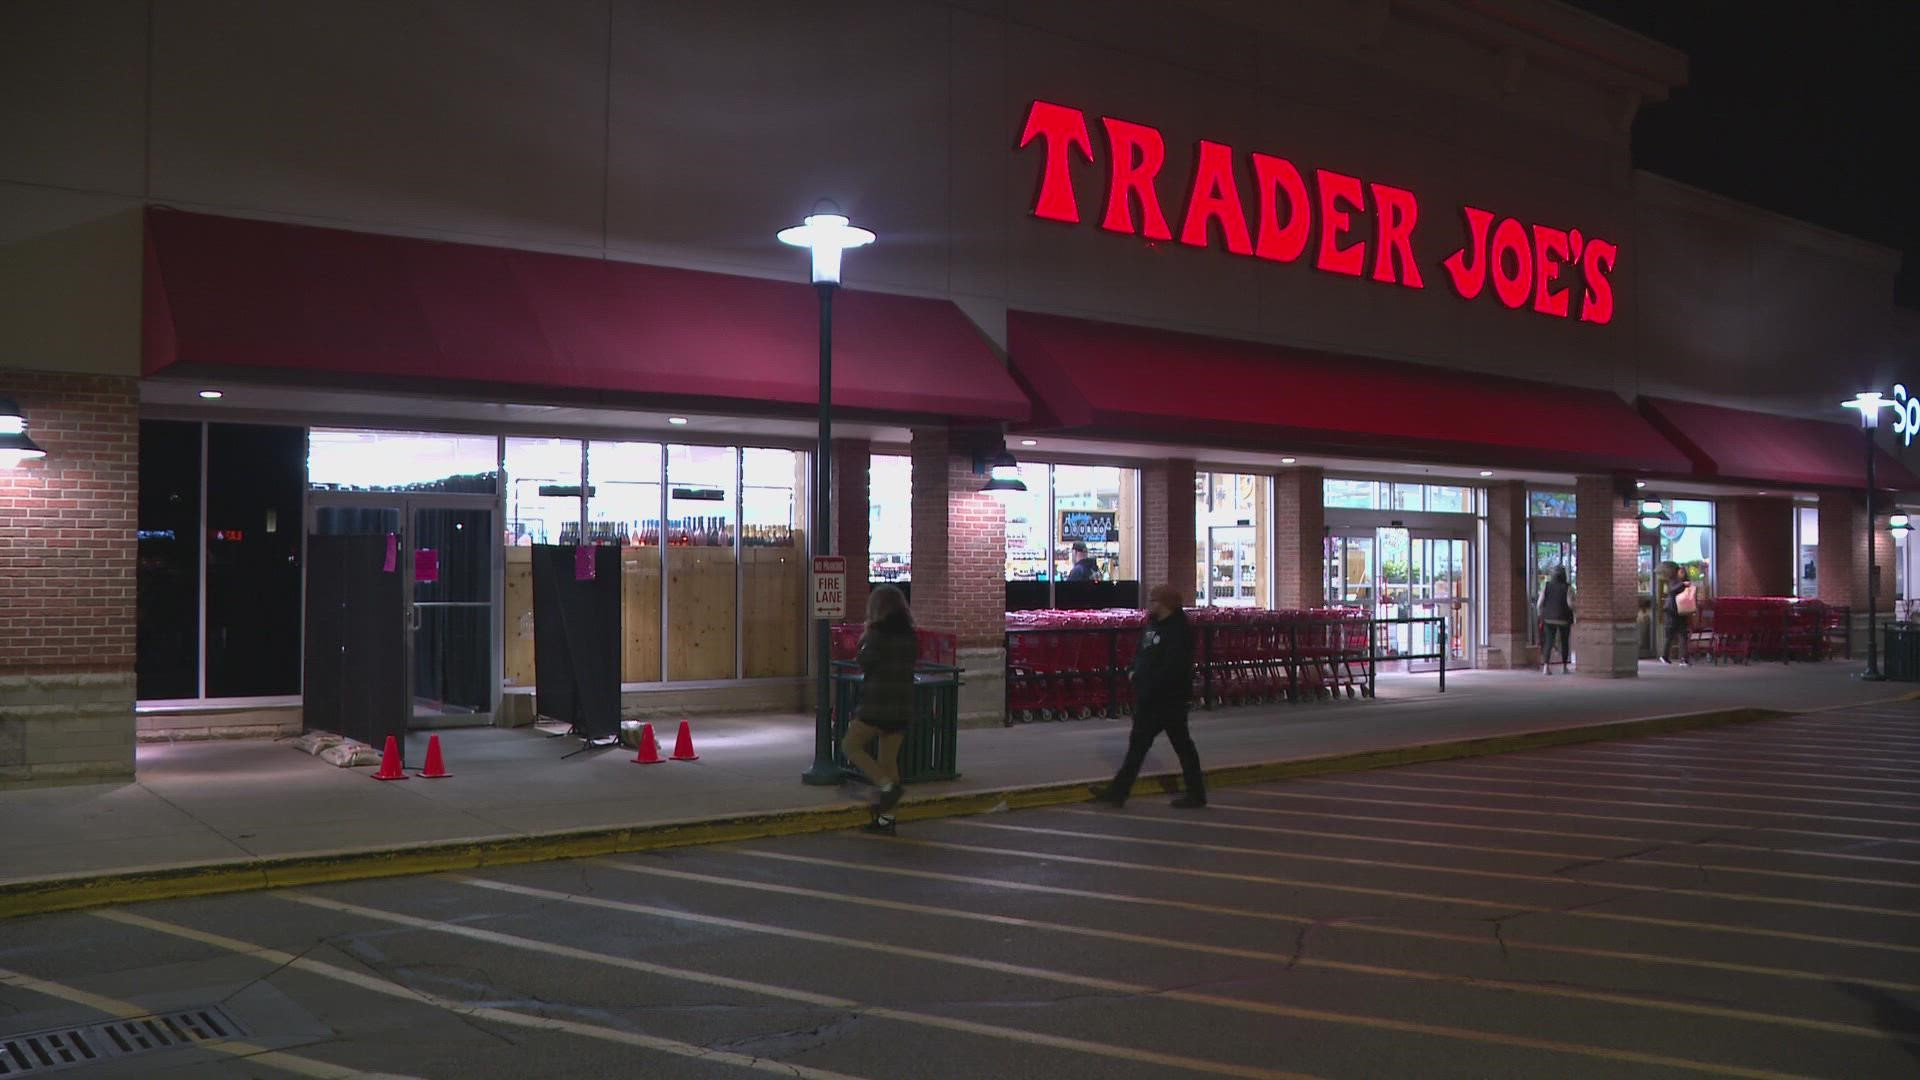 Store employees voted 48 to 36 to join Trader Joe's United.